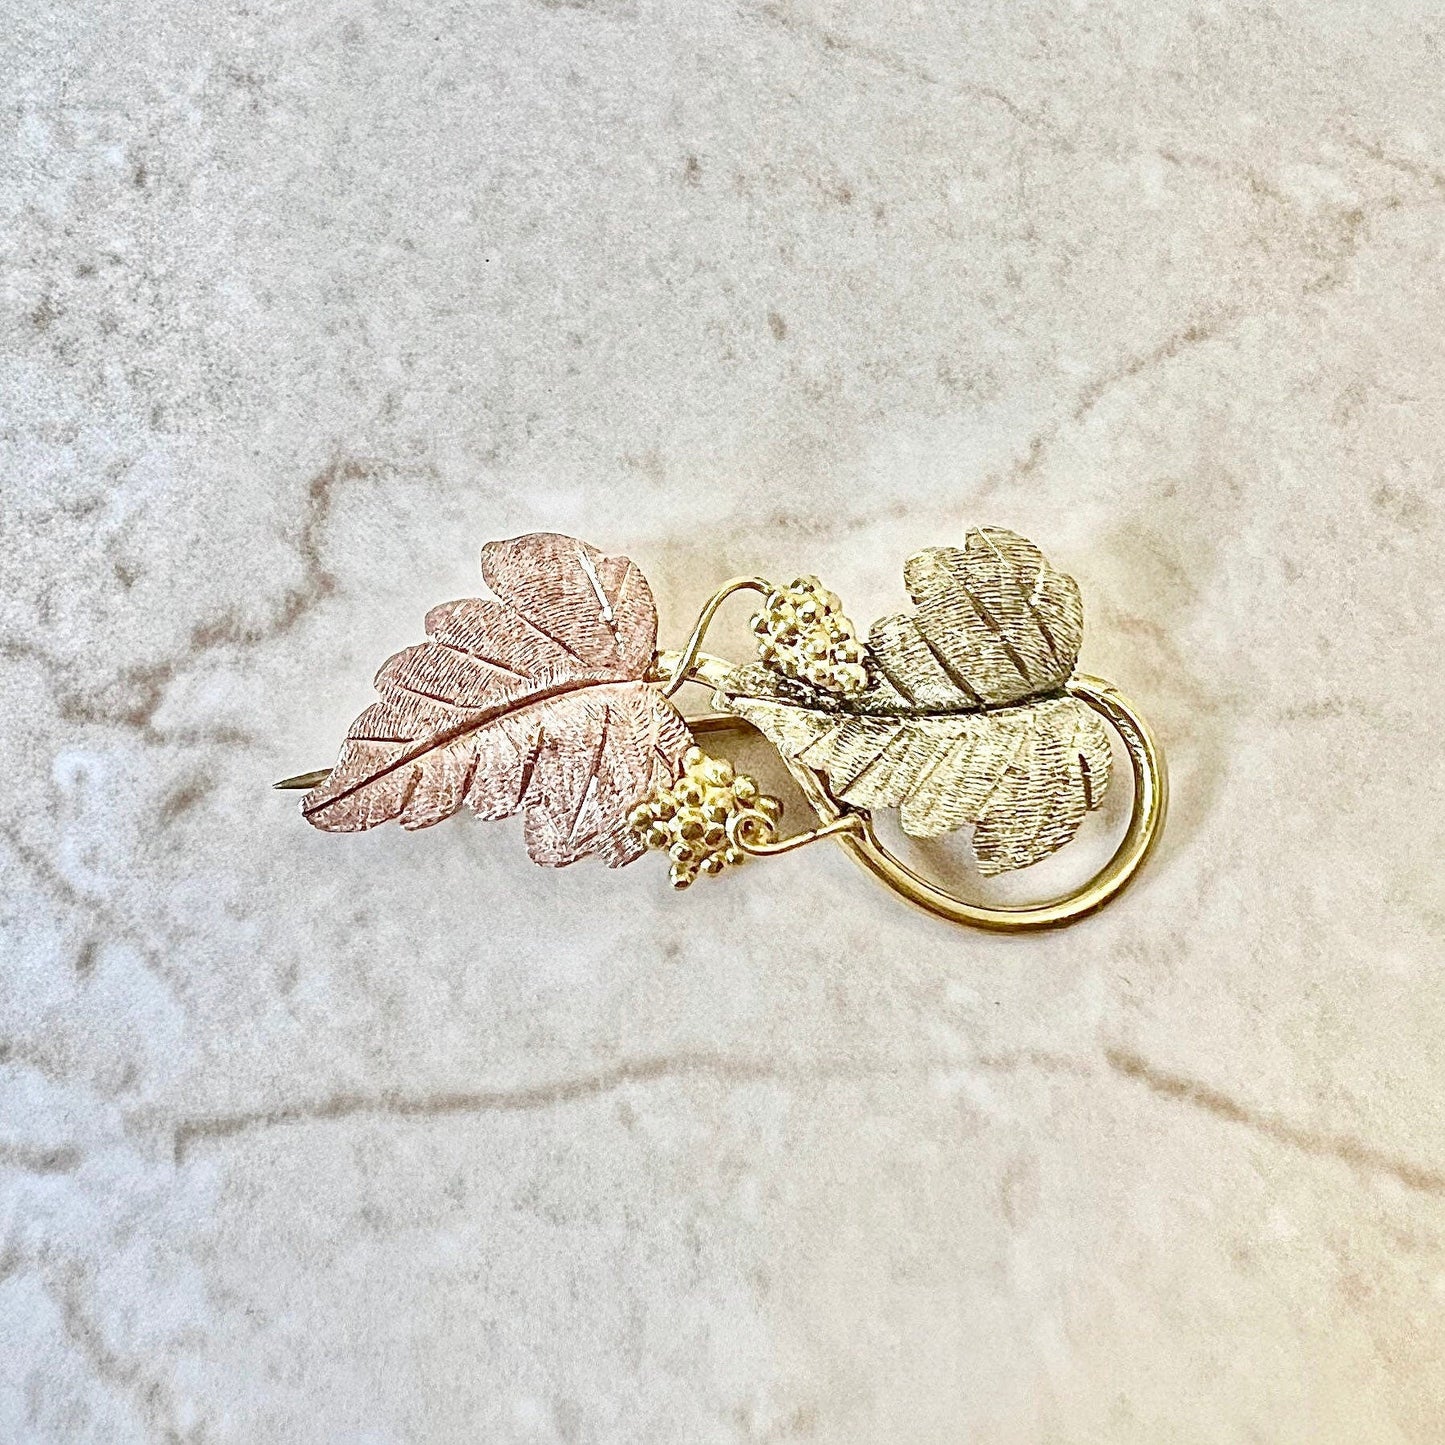 Vintage 12K Black Hills Gold Brooch Pin - Gold Grape Leaf Brooch - Birthday Gift For Her - Jewelry Sale - Best Valentine’s Day Gift